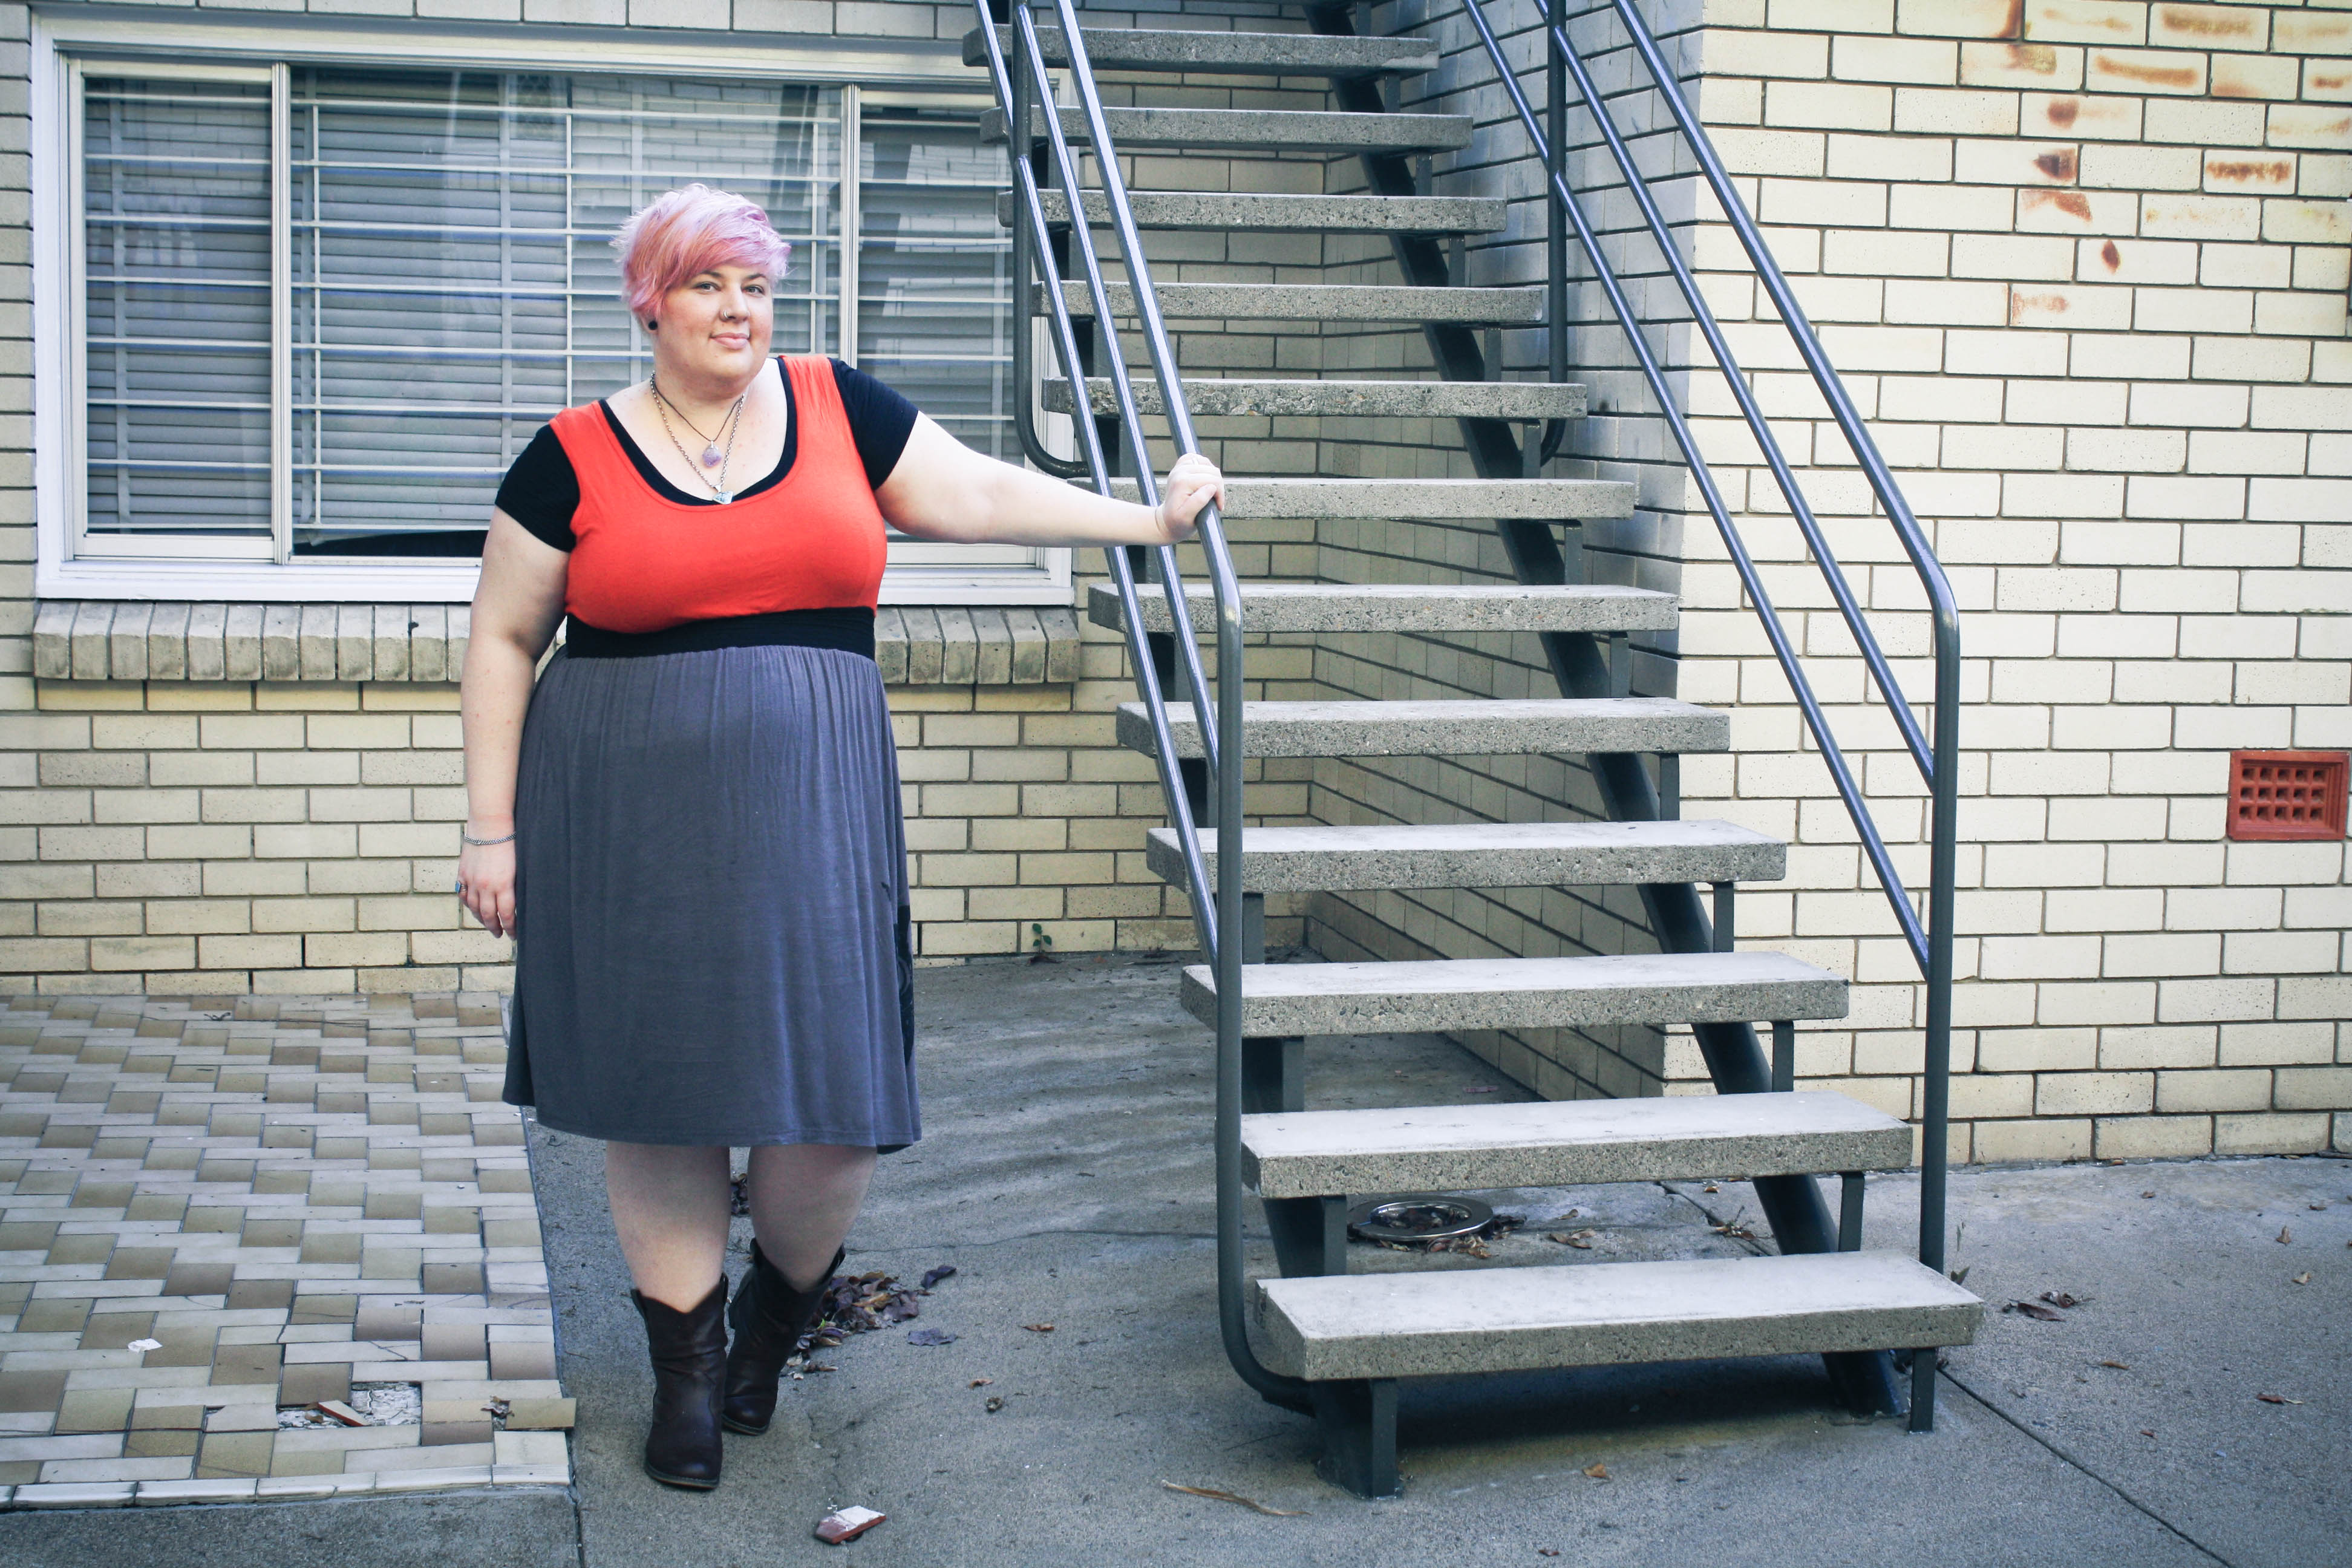 Photo of me wearing a dress with a red top and grey bottom with a black tshirt underneath and cowboy boots. I'm leaning against a stairway rail.